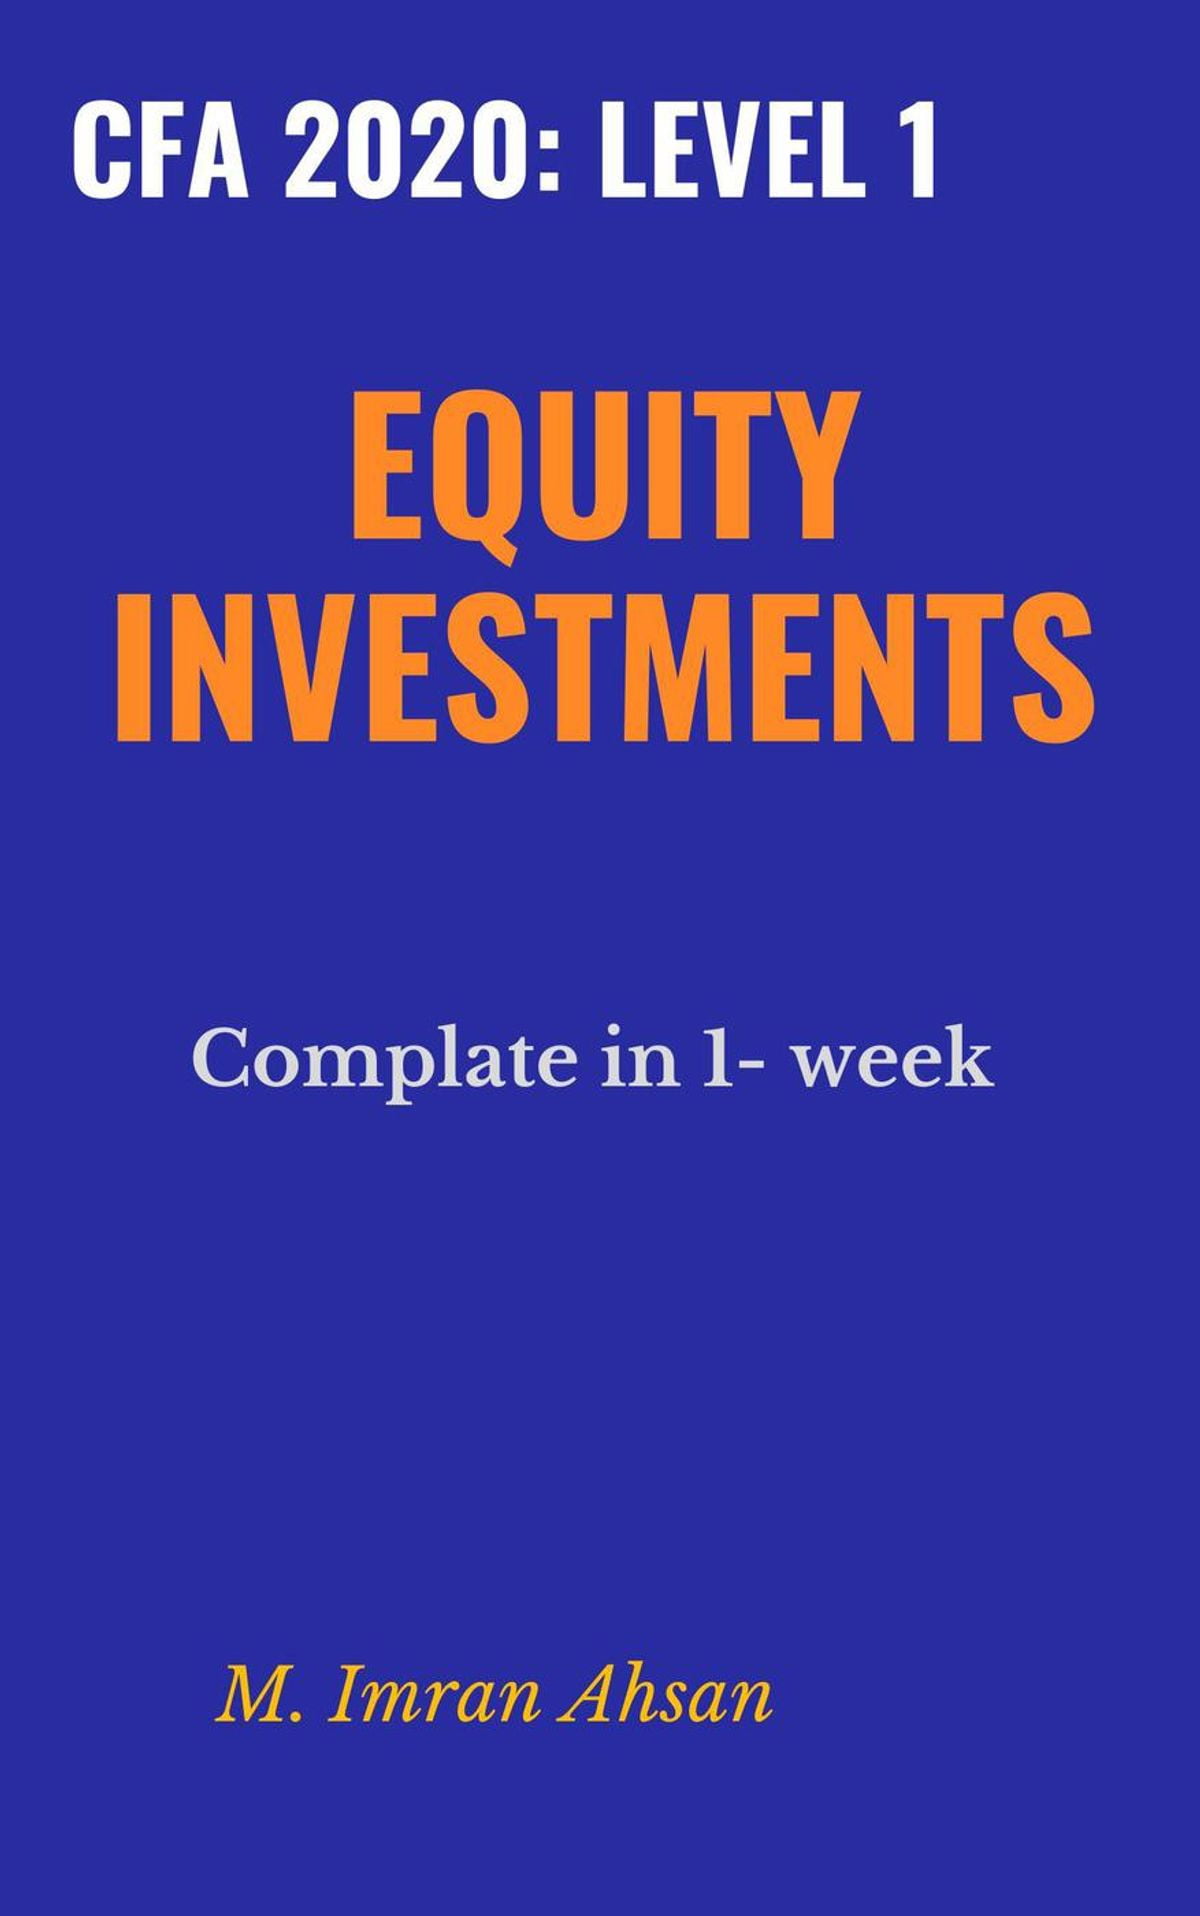 Equity Investment for CFA level 1, 2020 eBook Walmart